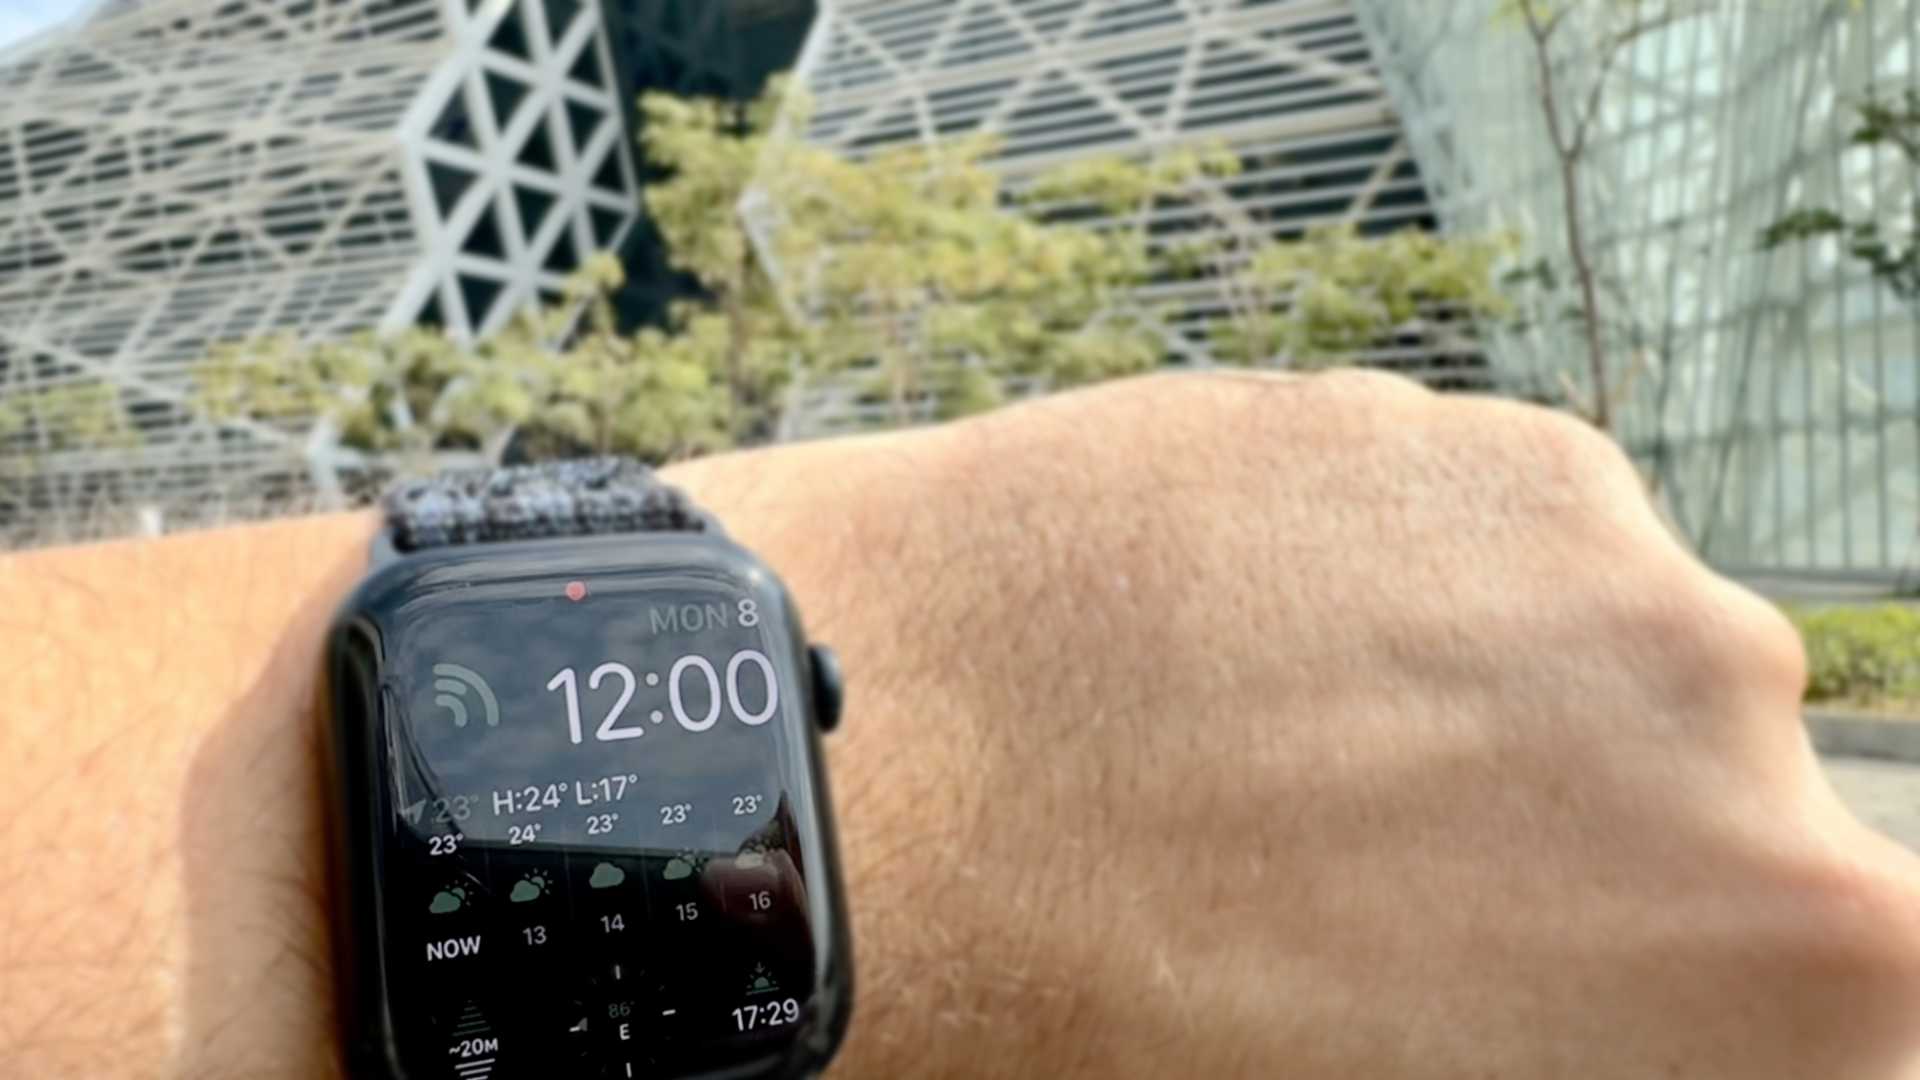 Close-up of an Apple Watch on a wrist. The time shows 12 o’clock on Monday the 8th. The weather complication shows it’s currently 23ºC.